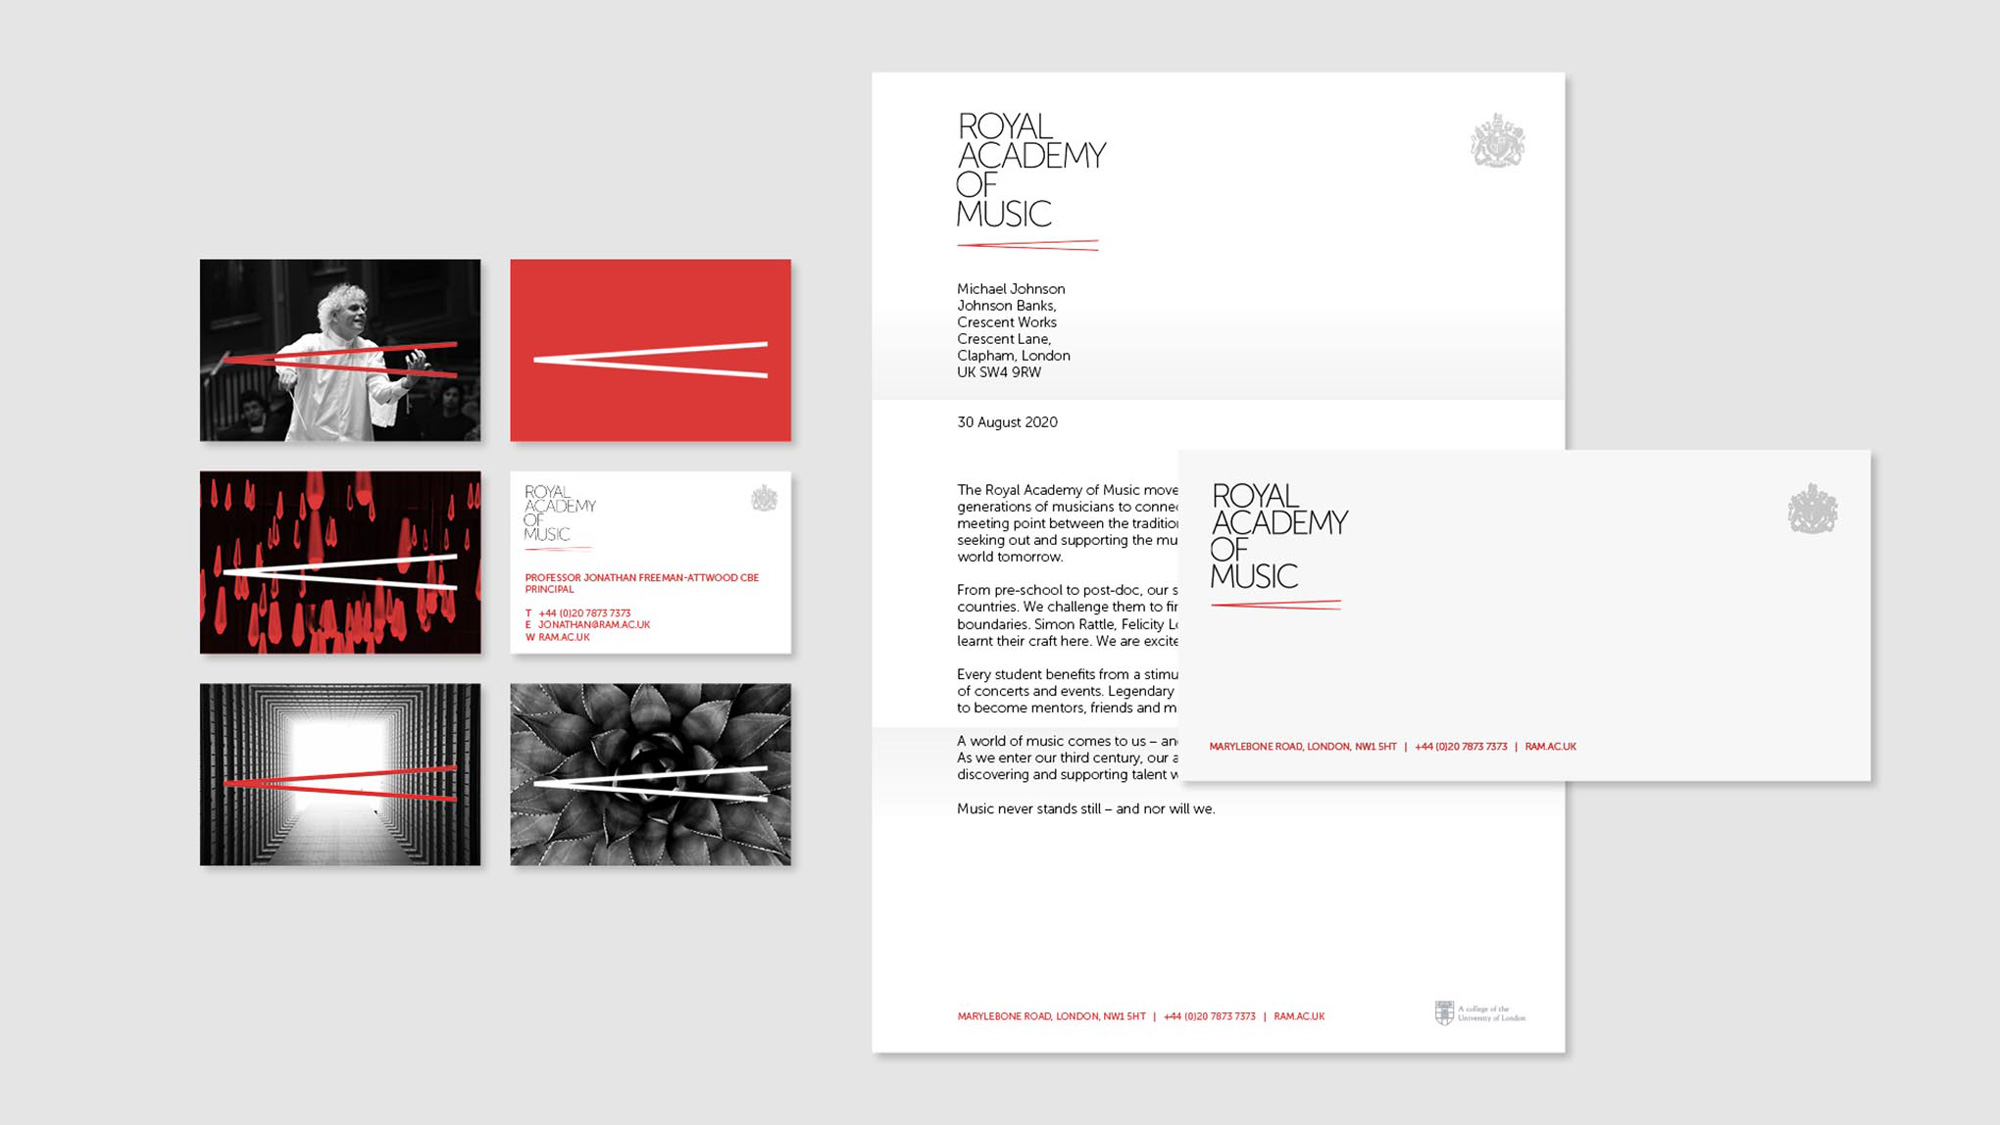 New Logo and Identity for Royal Academy of Music by Johnson Banks